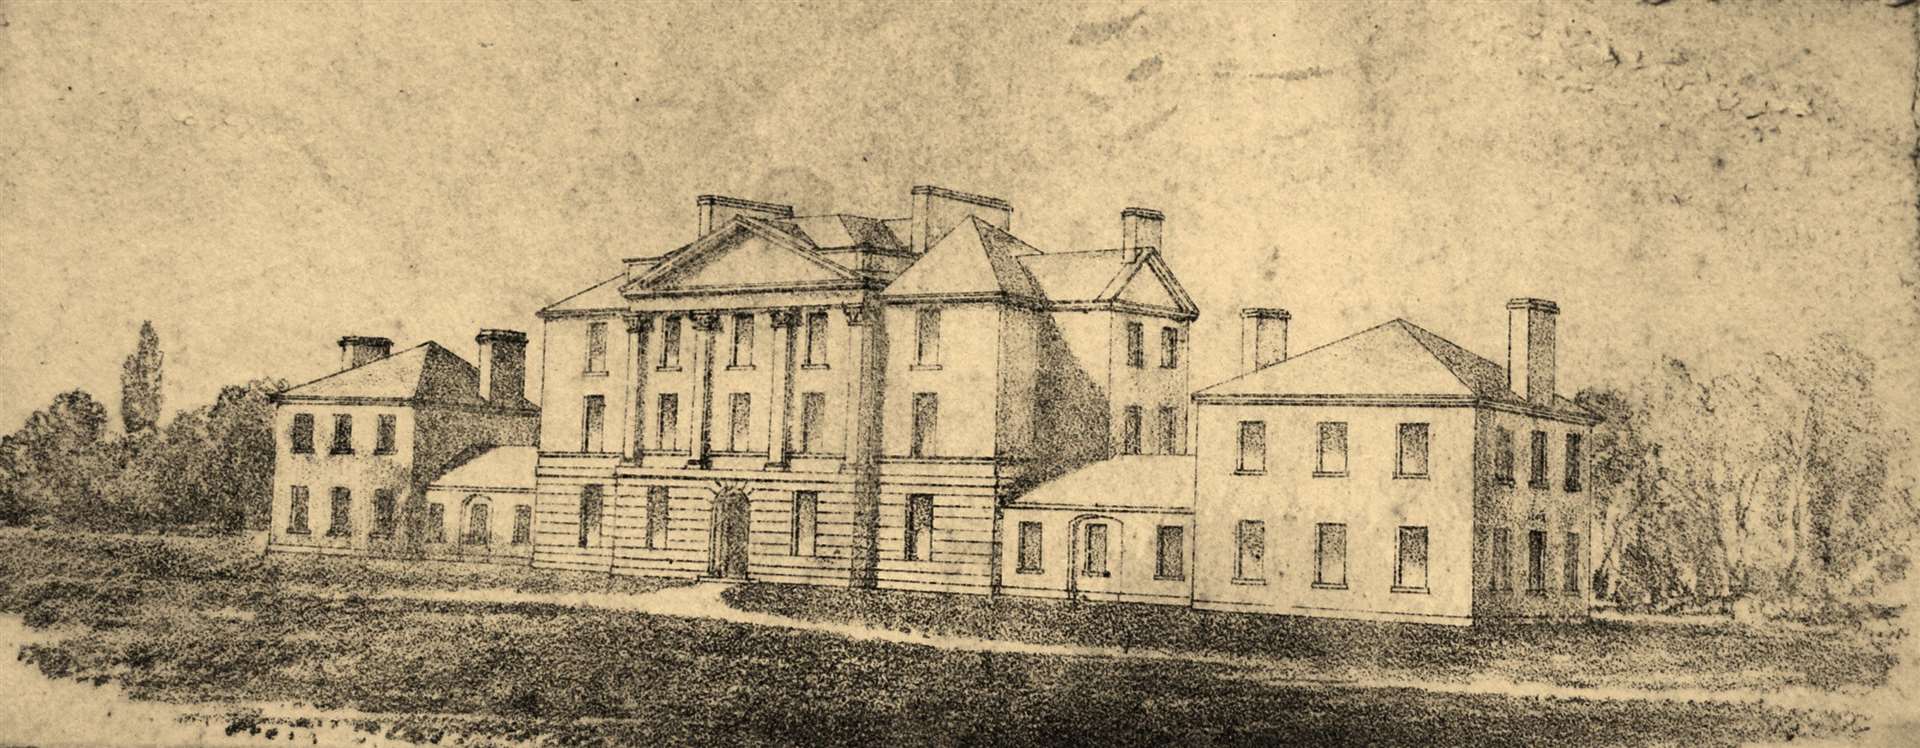 The former Royal Northern Infirmary building as it appeared in 1804.